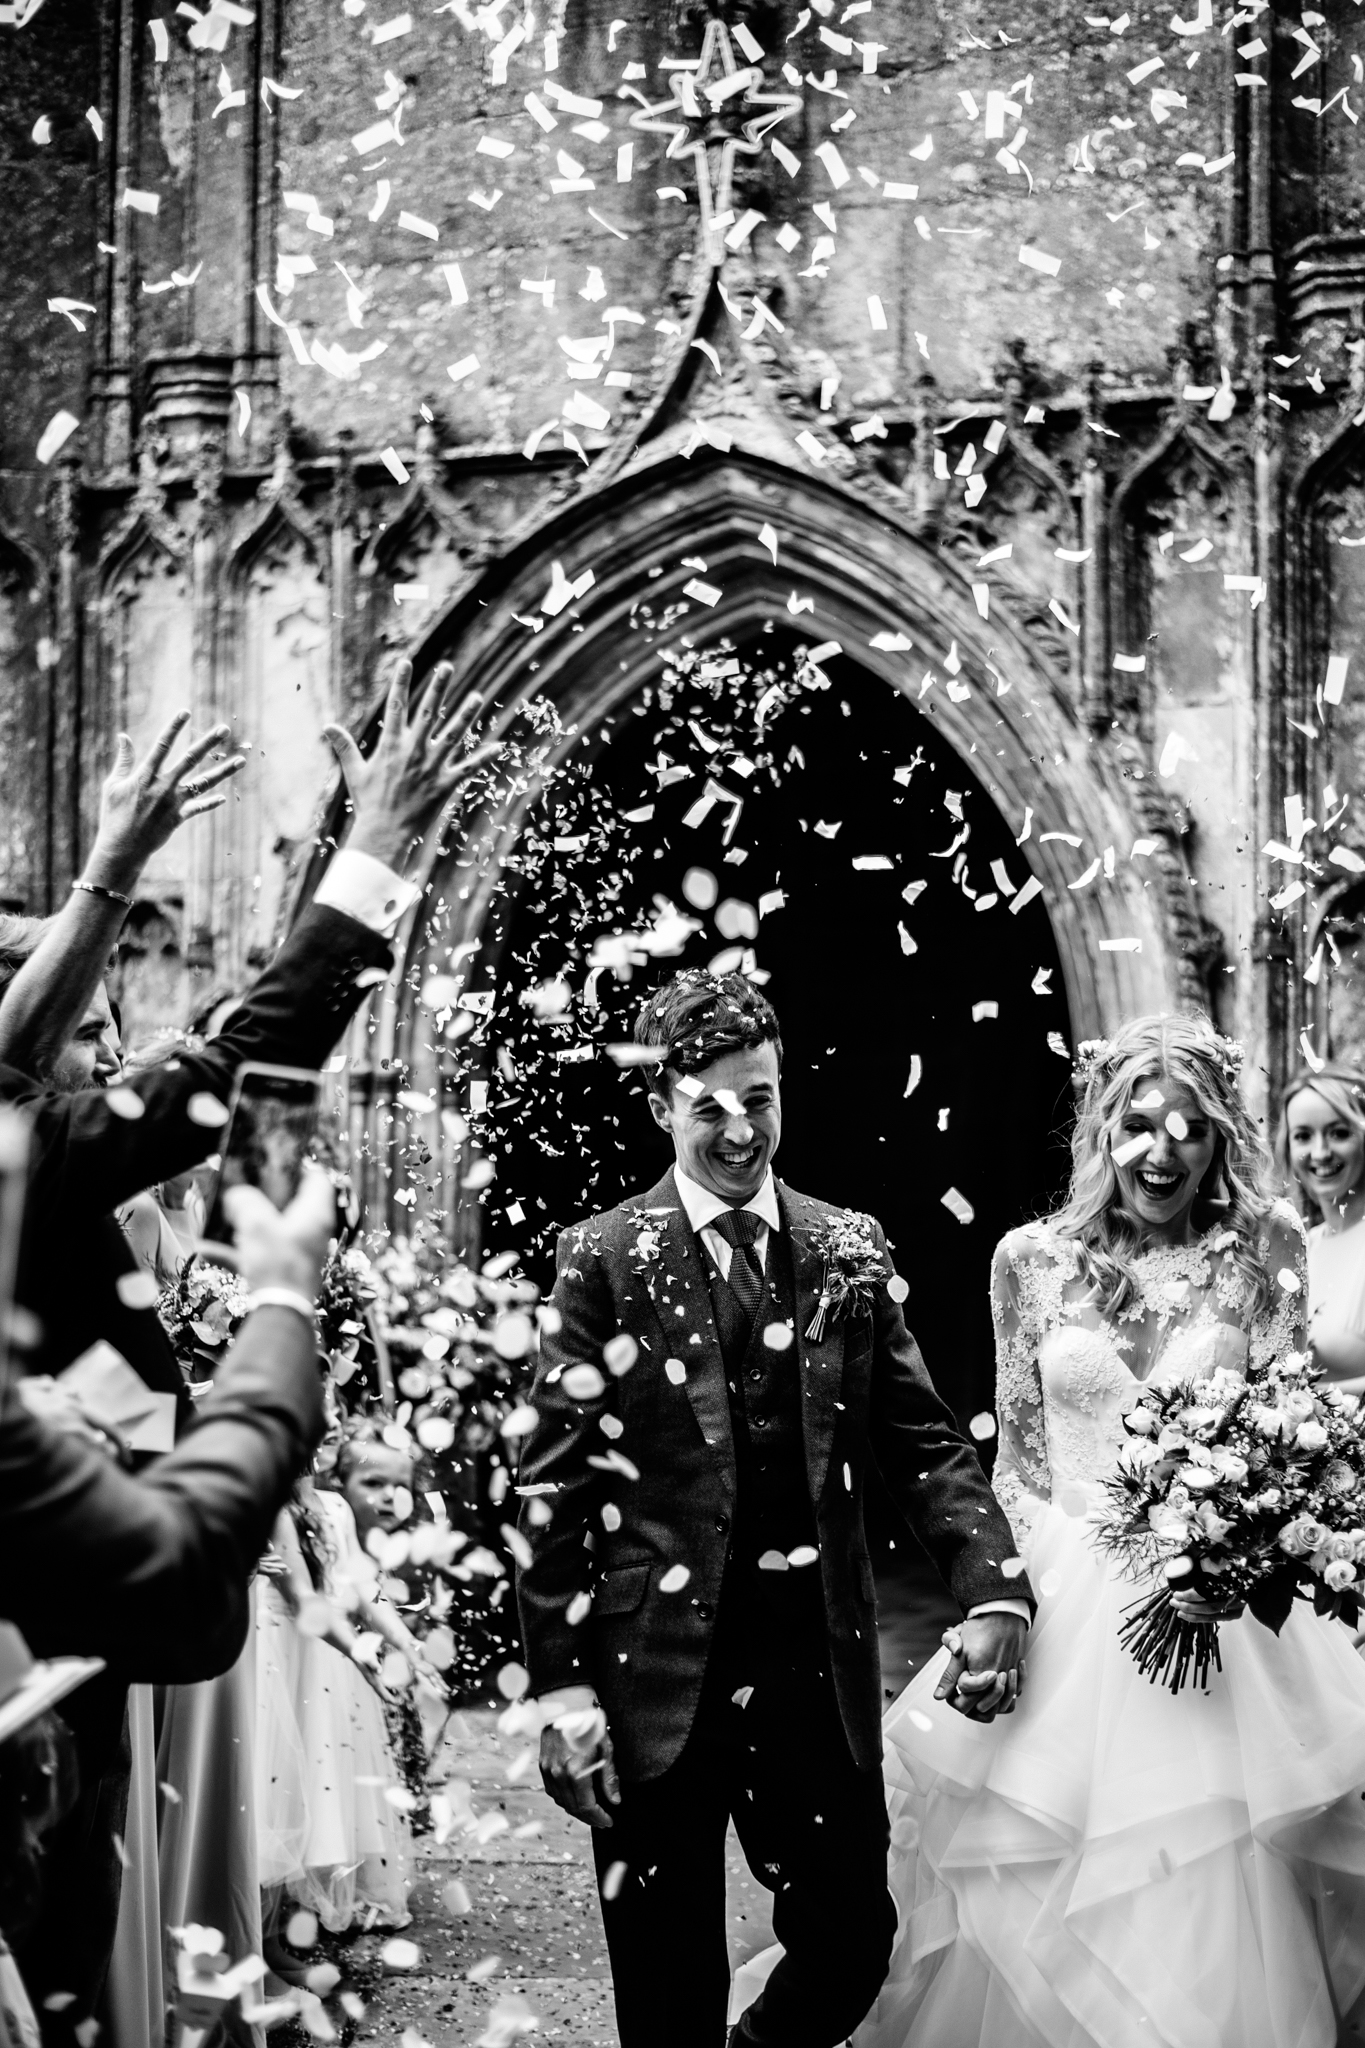 Confetti cannon being launched outside church to create epic photograph with loads of white confetti